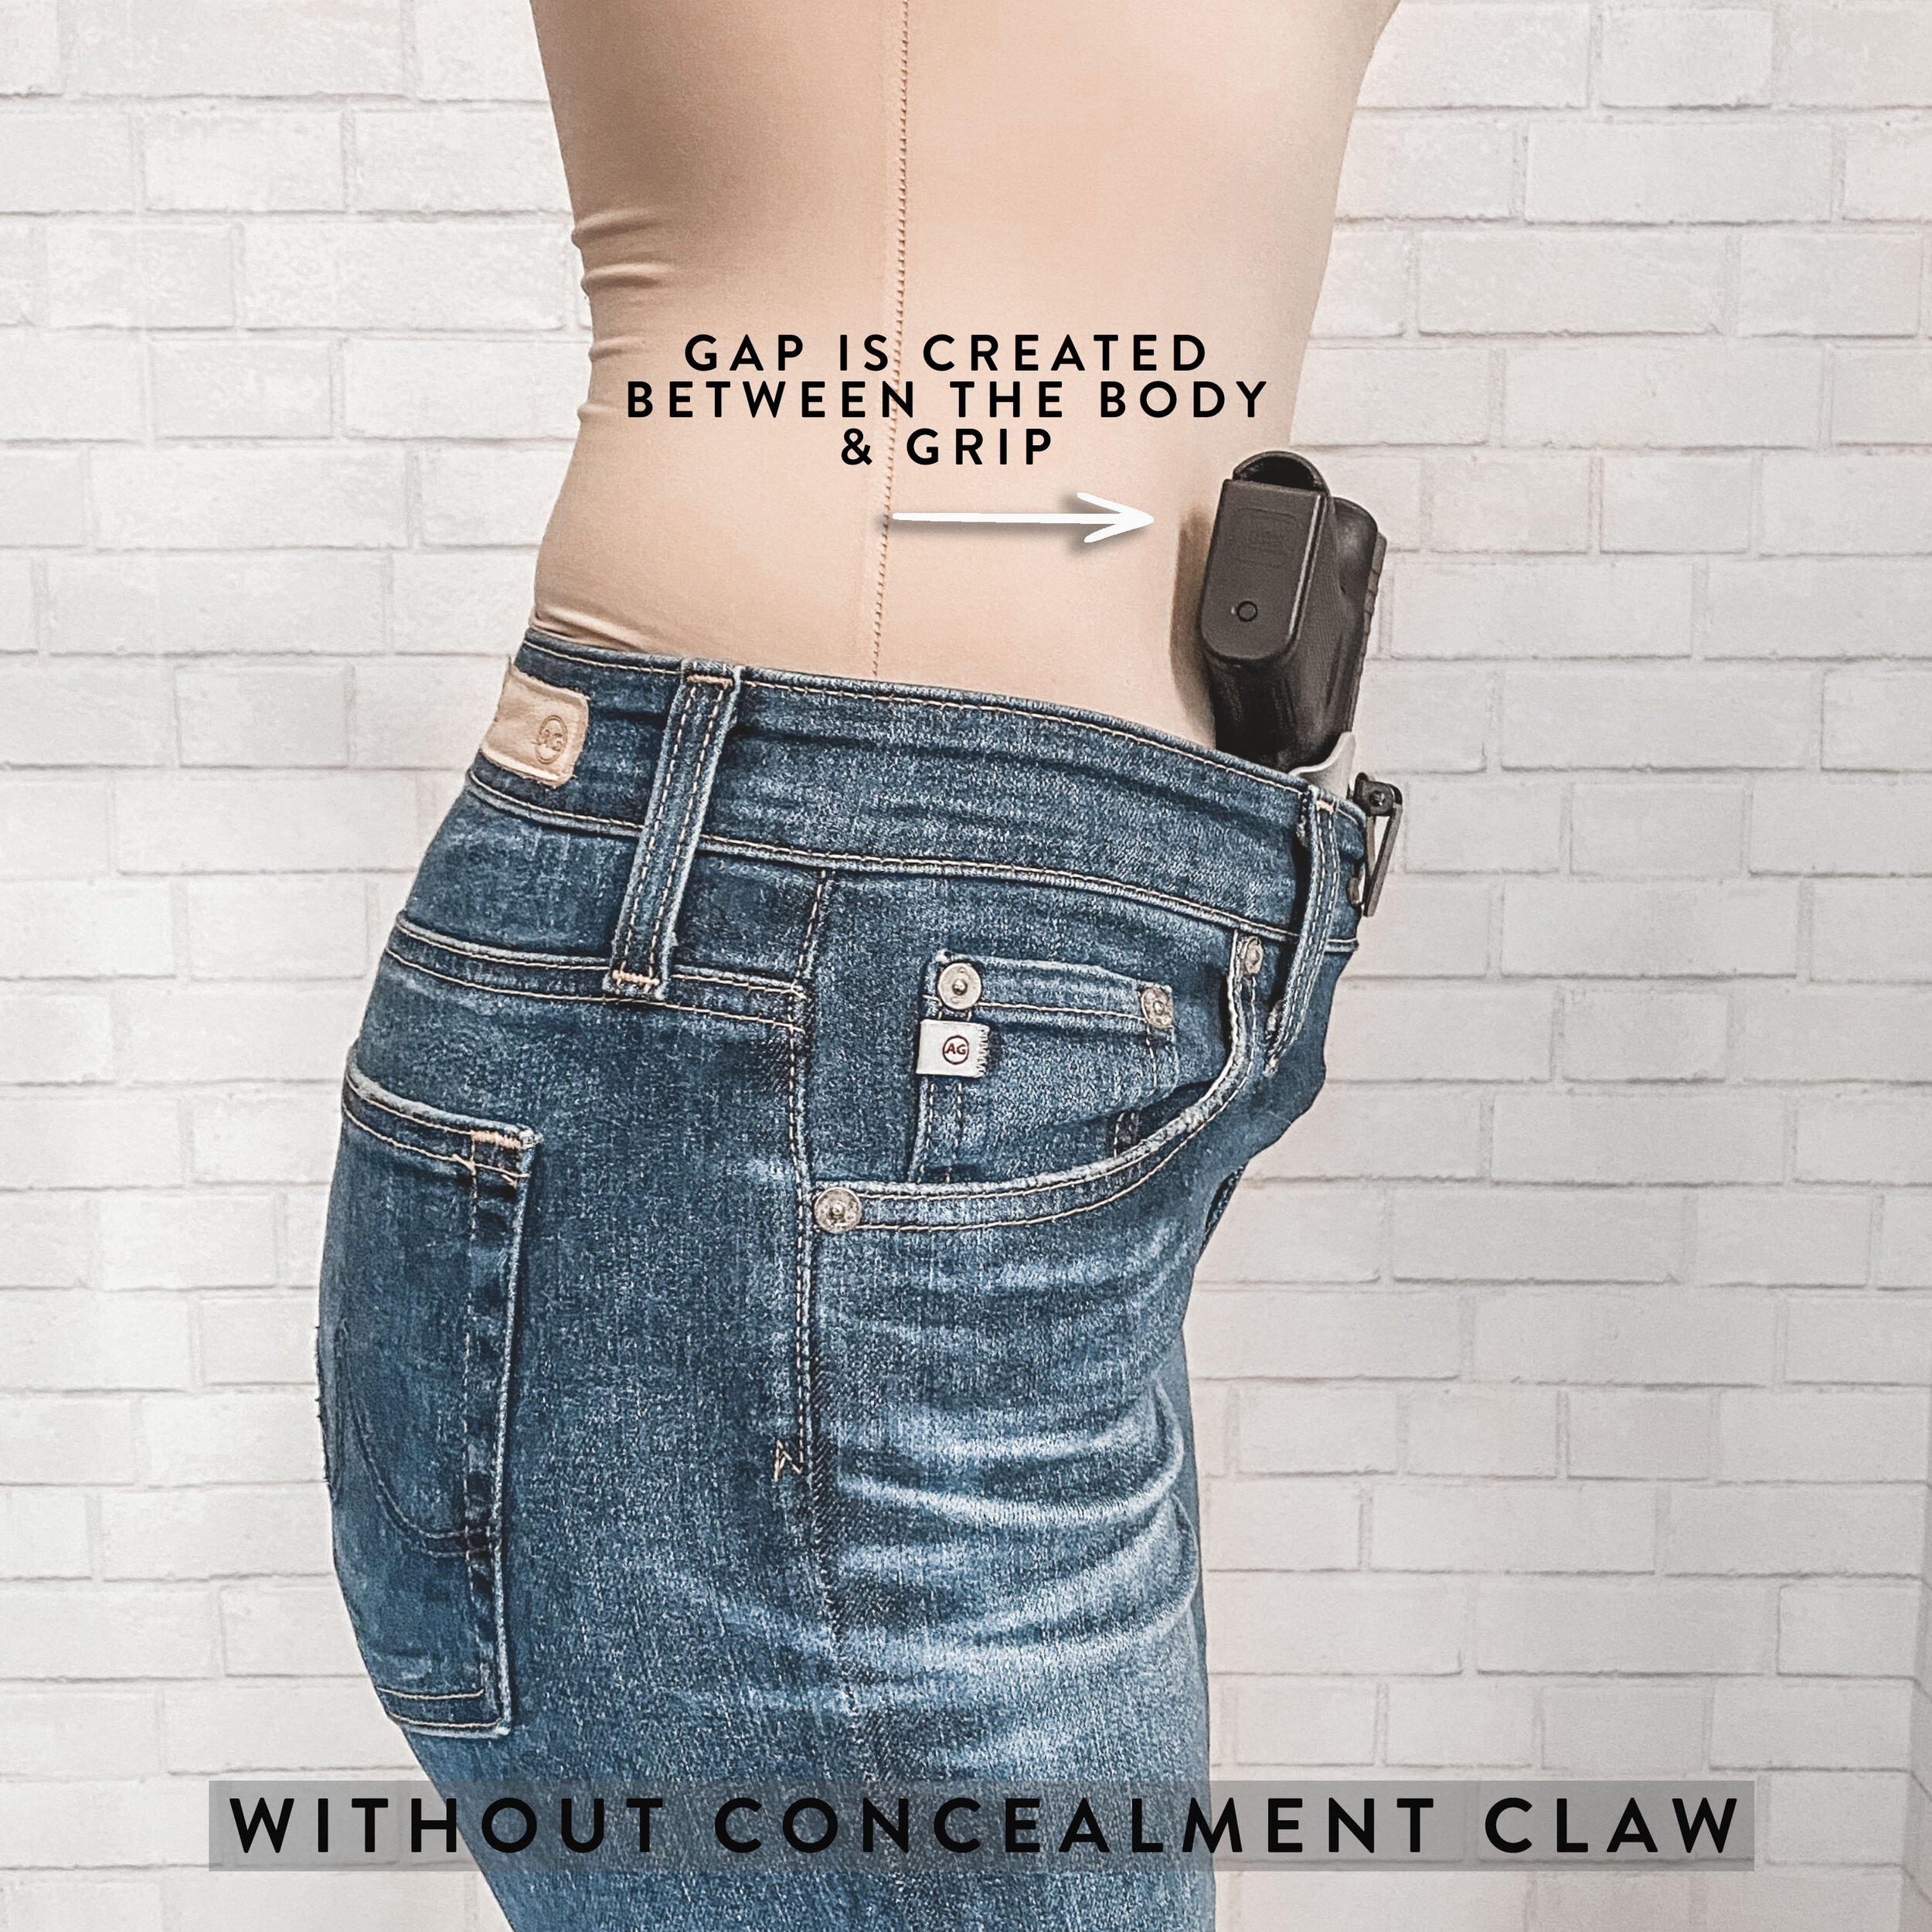 Holster for Women; Best Way to Carry Concealed for Women